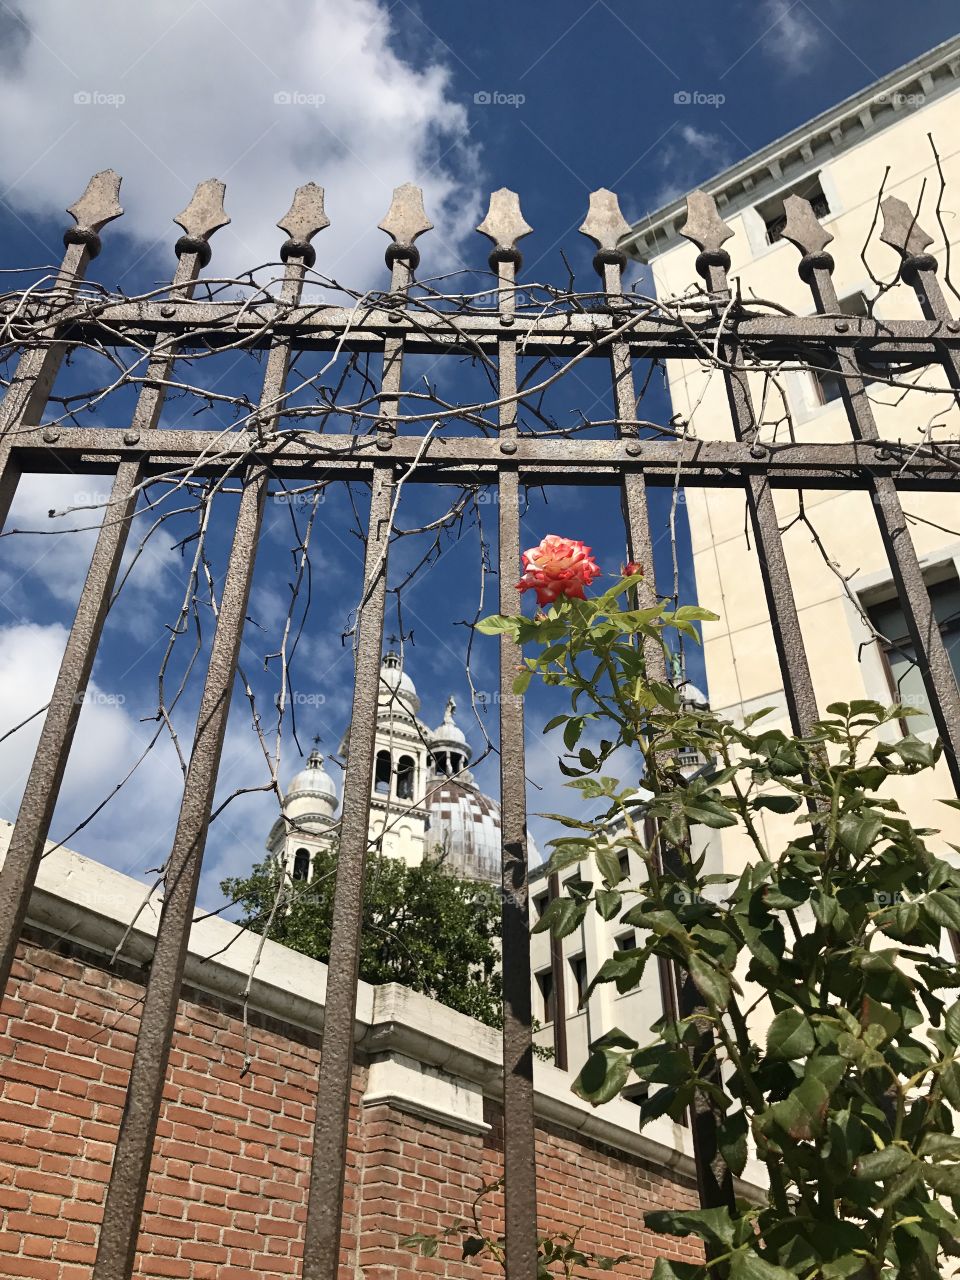 A beautiful pink rose grows on an old iron fence in Venice, Italy